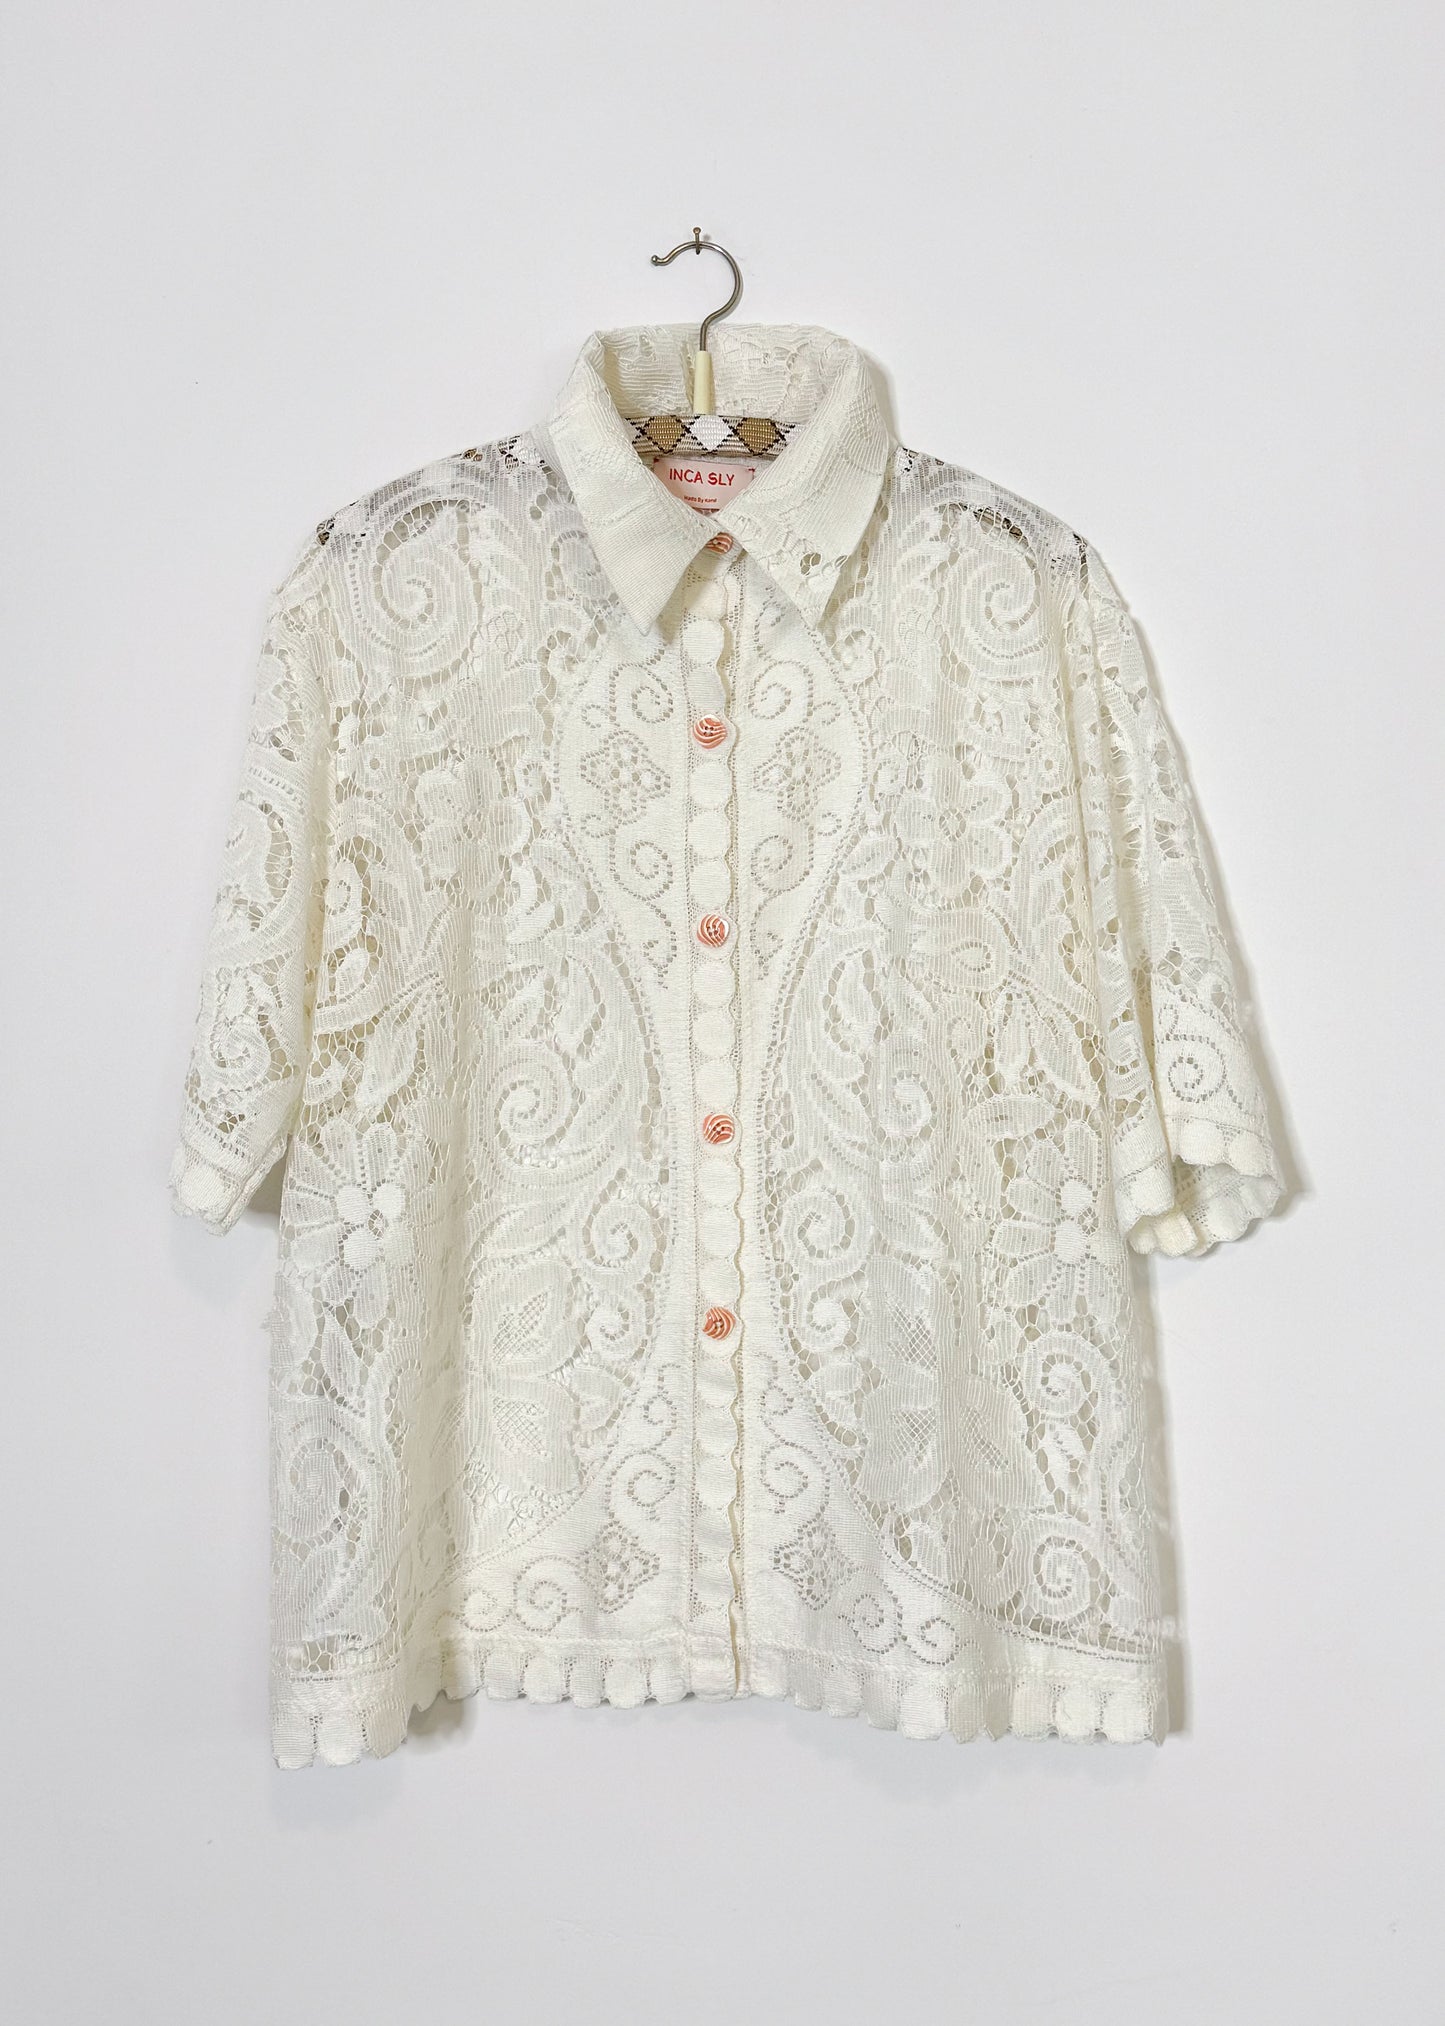 FLORAL LACE SHORT SLEEVE SHIRT